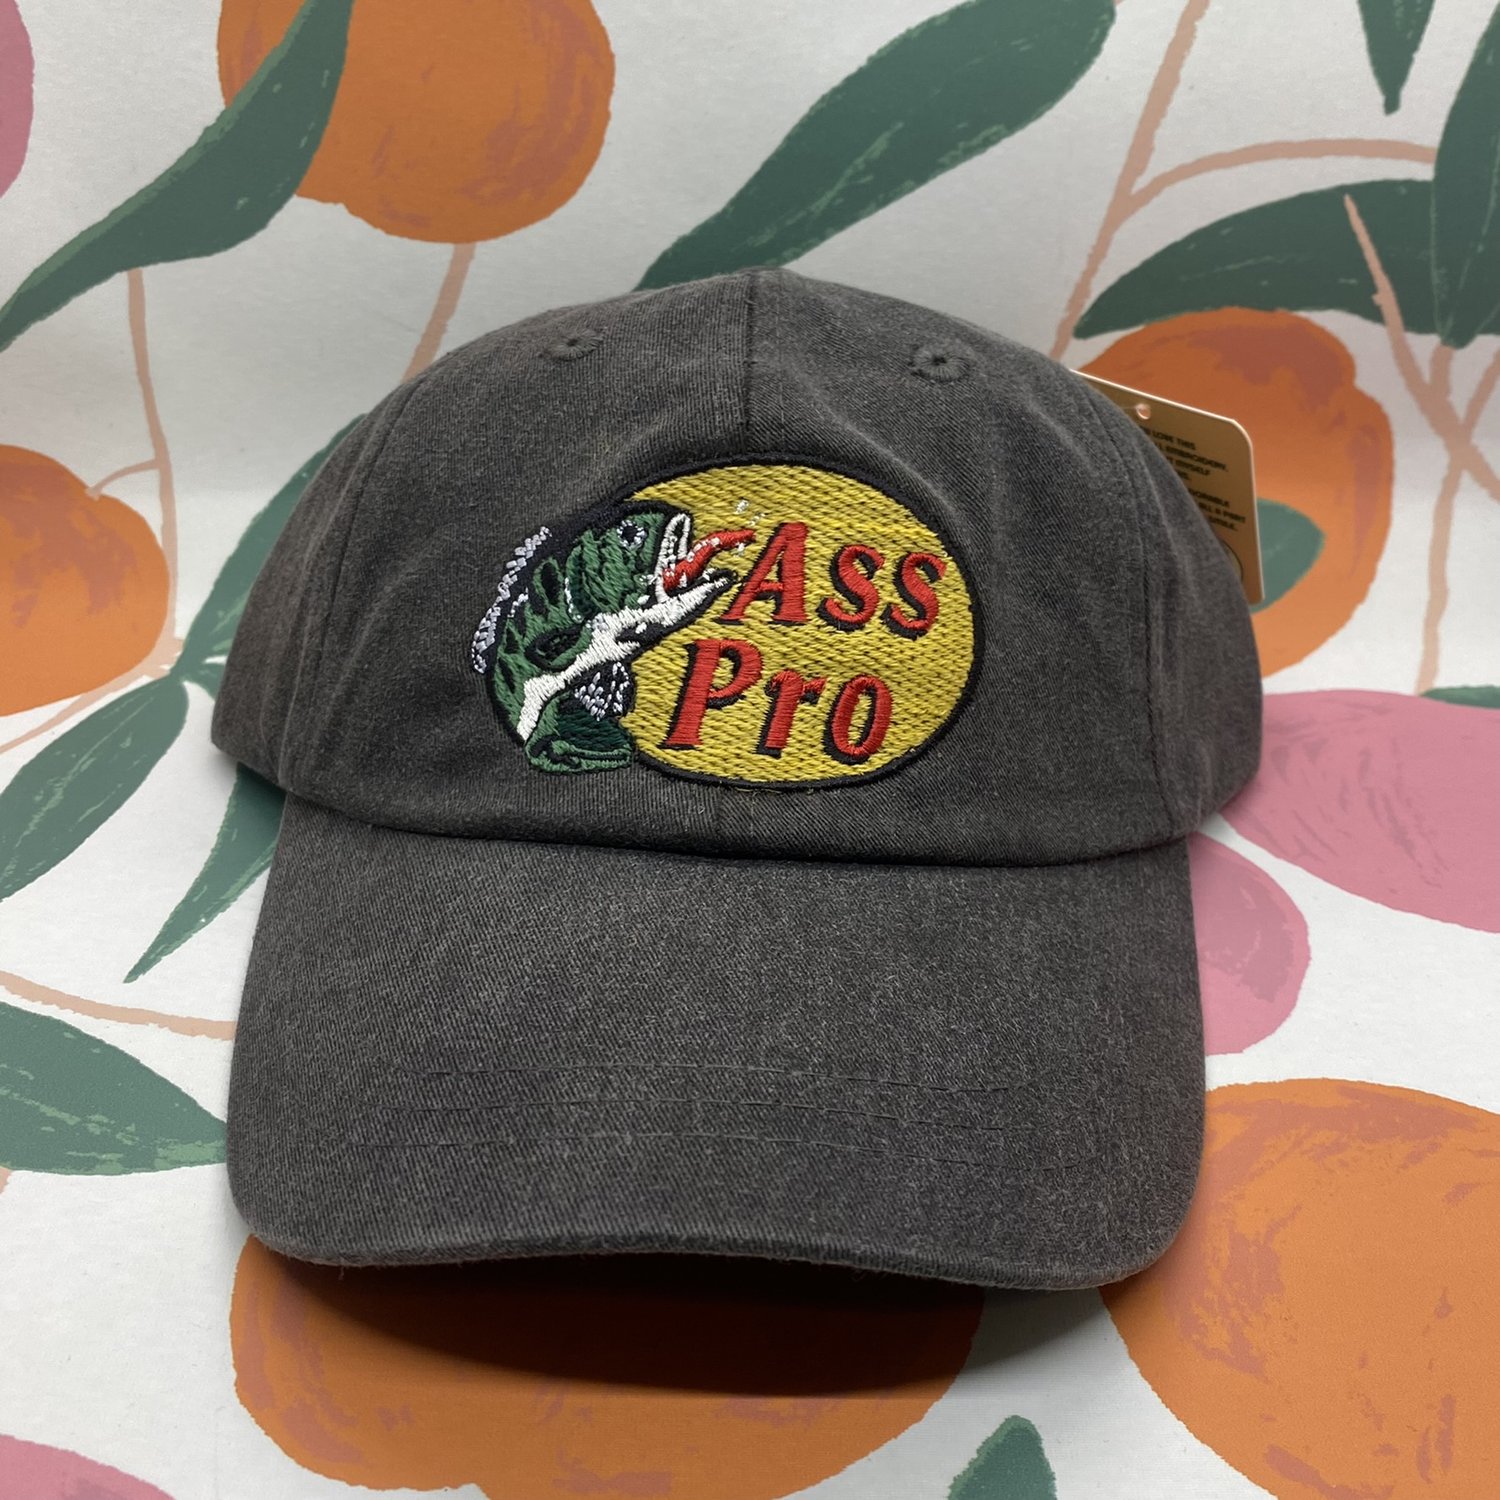 Ass Pro Hat — Cousin Kenny’s